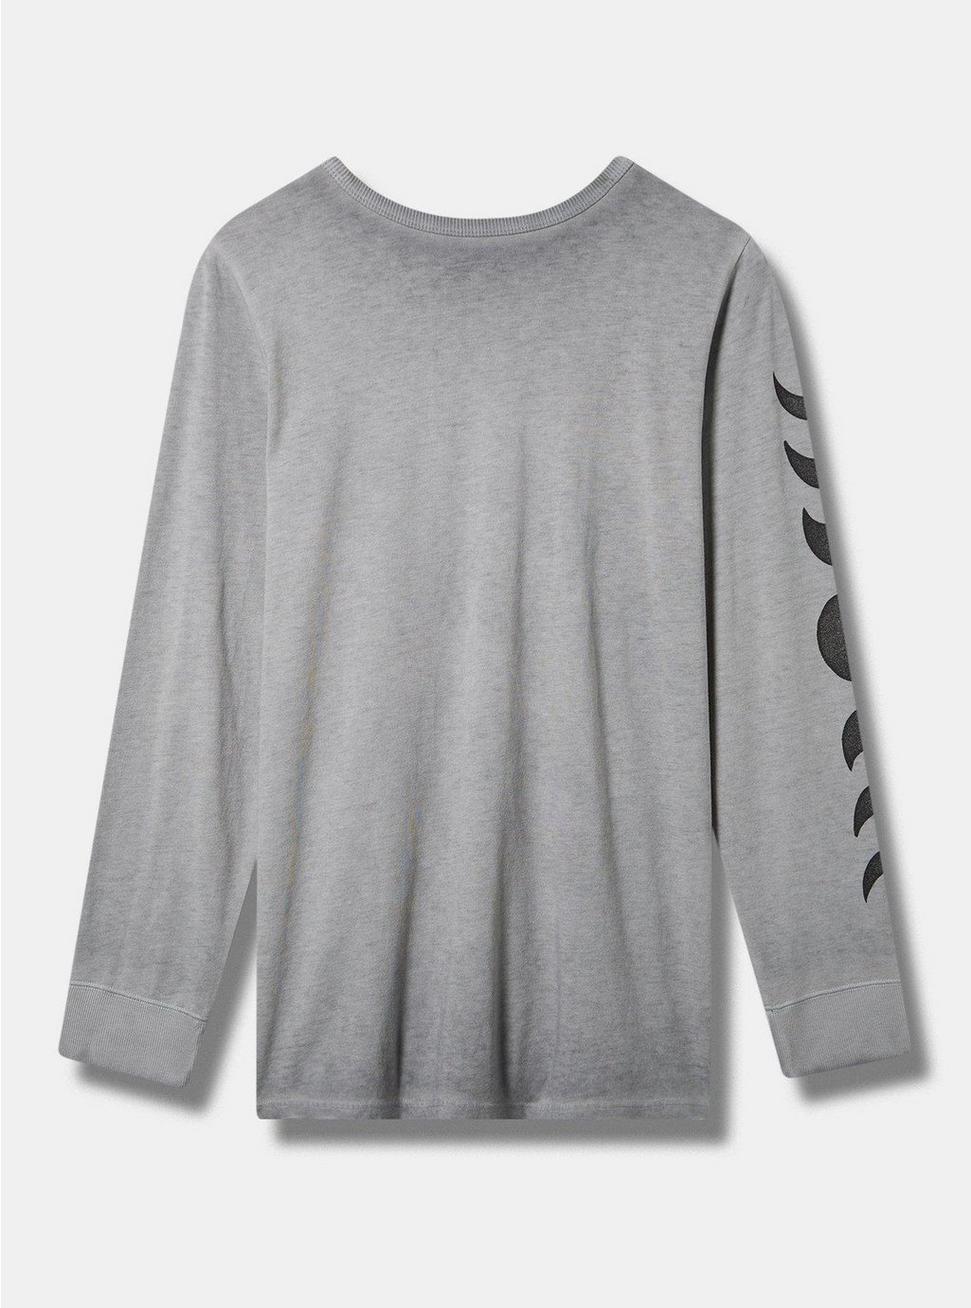 Plus Size Mystic Moth Classic Fit Signature Jersey Long Sleeve Tee, FORMAL GRAY, alternate